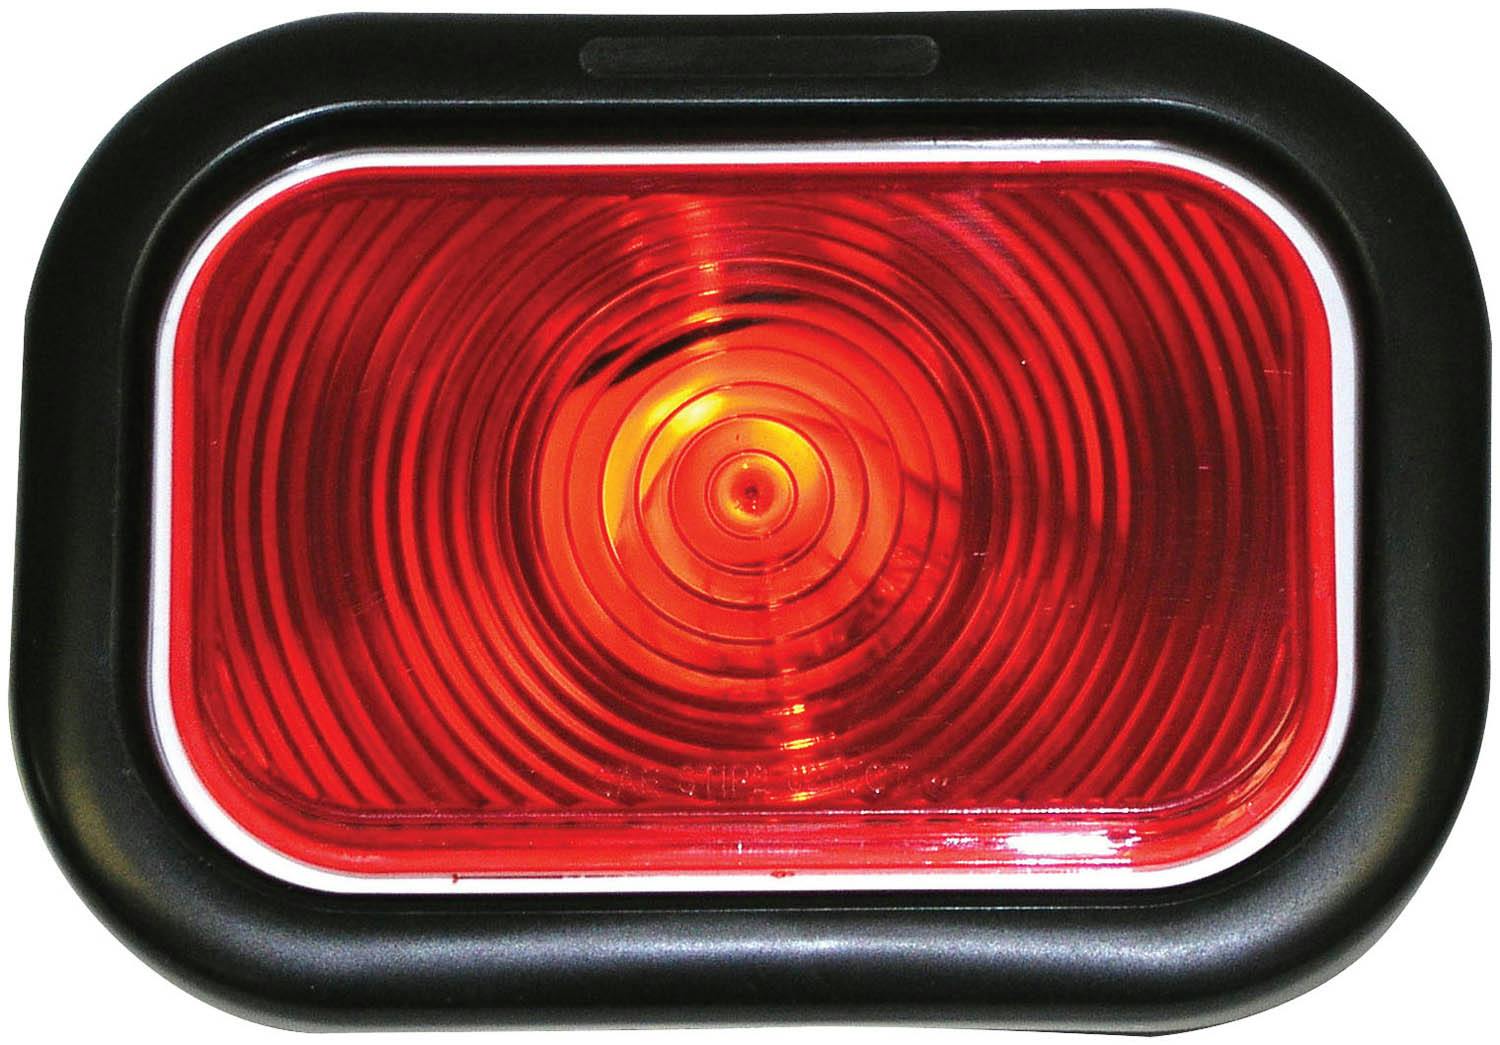 Incandescent Stop/Turn/Tail, Rectangular, Kit, 3.4375"X5.3125", red (Pack of 20)